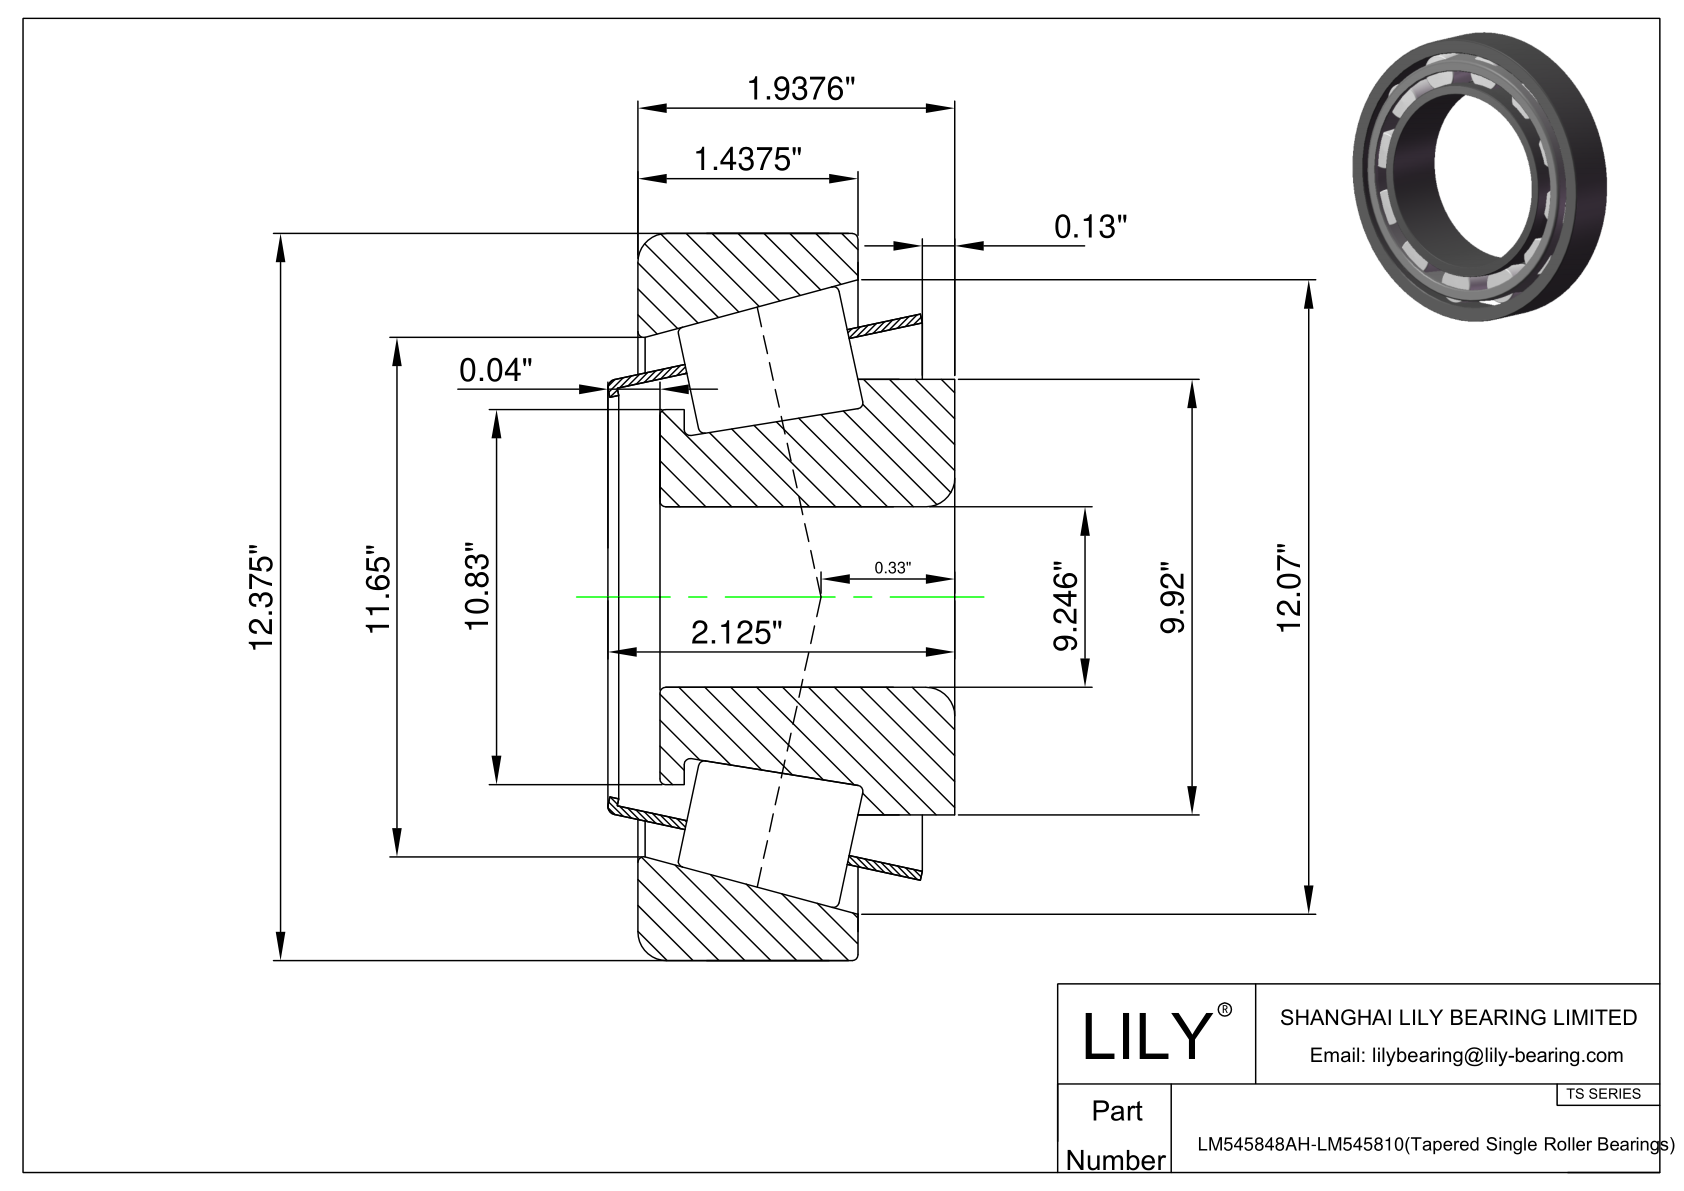 LM545848AH-LM545810 TS (Tapered Single Roller Bearings) (Imperial) cad drawing